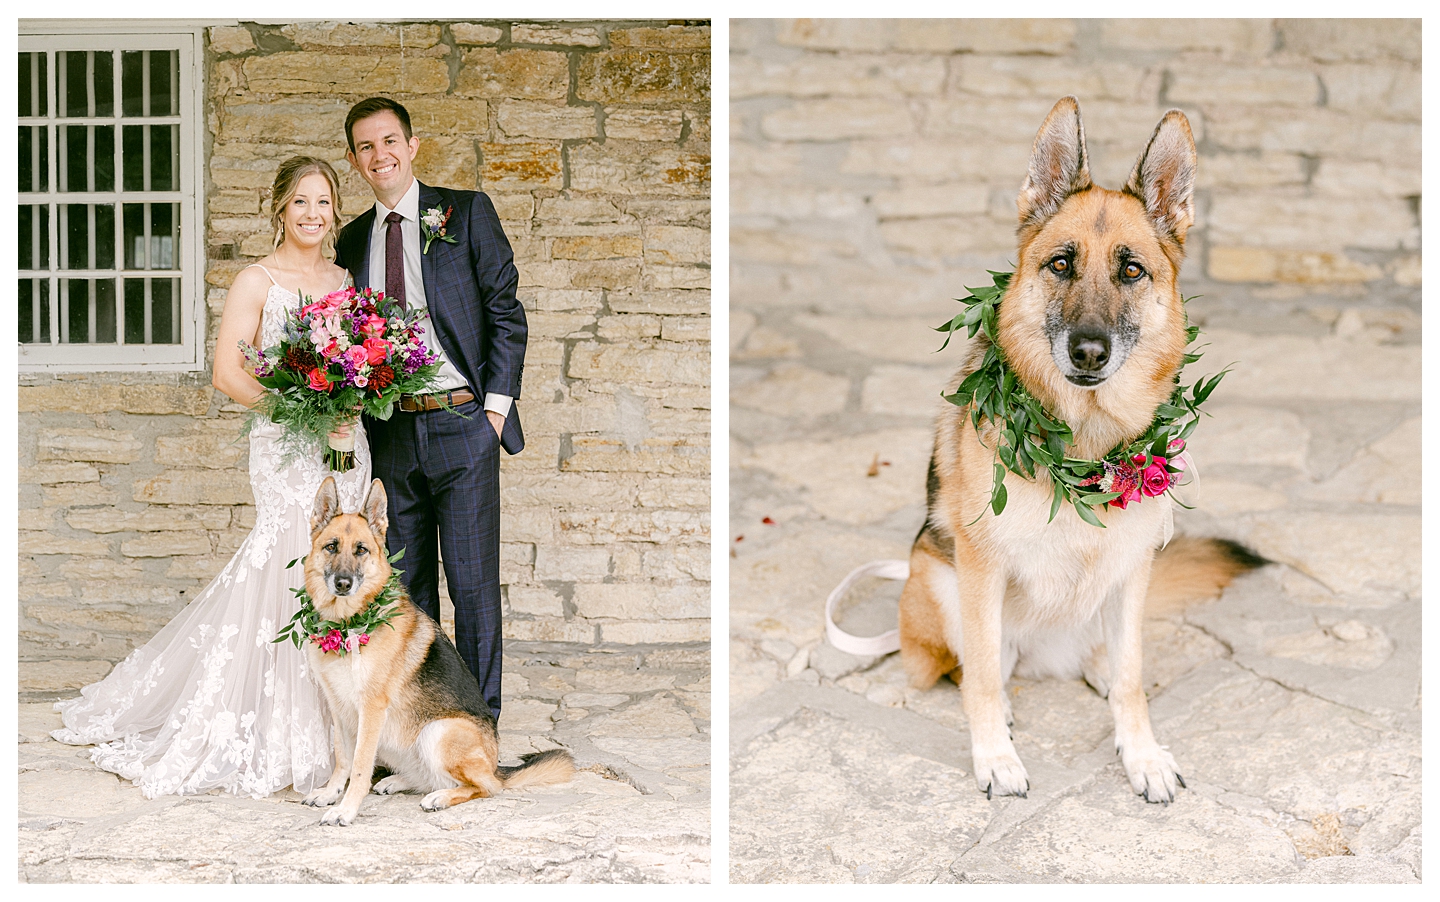 A bride and groom's portrait with their dog at a Mayowood Stone Barn Wedding. Photo by Kayla Lee.